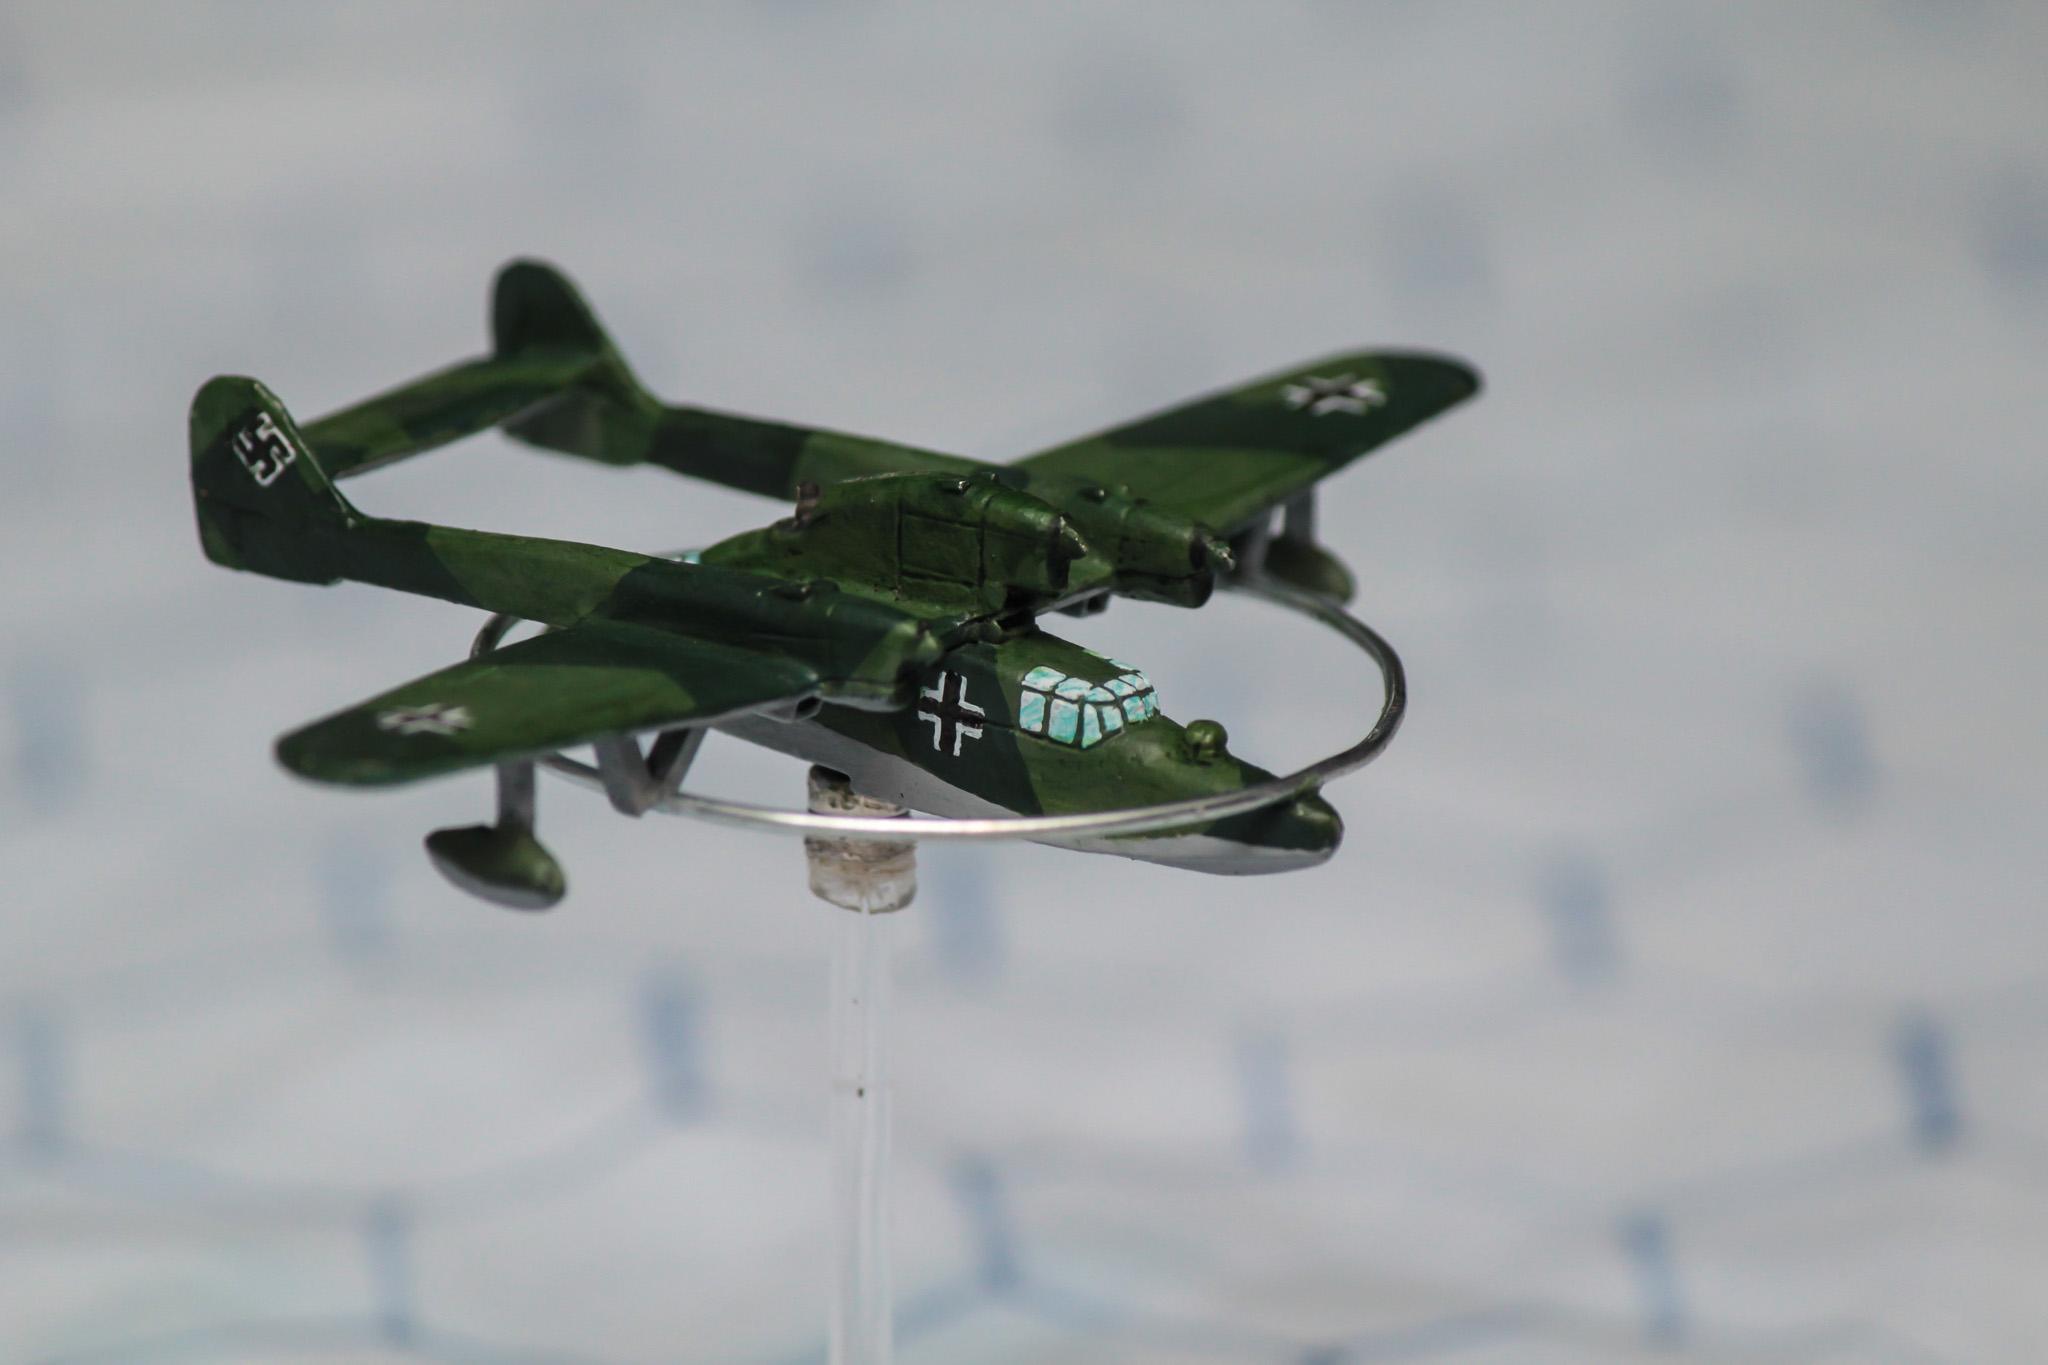 1:300 Scale, 6mm Scale, Air Combat, Flying Boat, Germans, Luftwaffe, Seaplane, World War 2